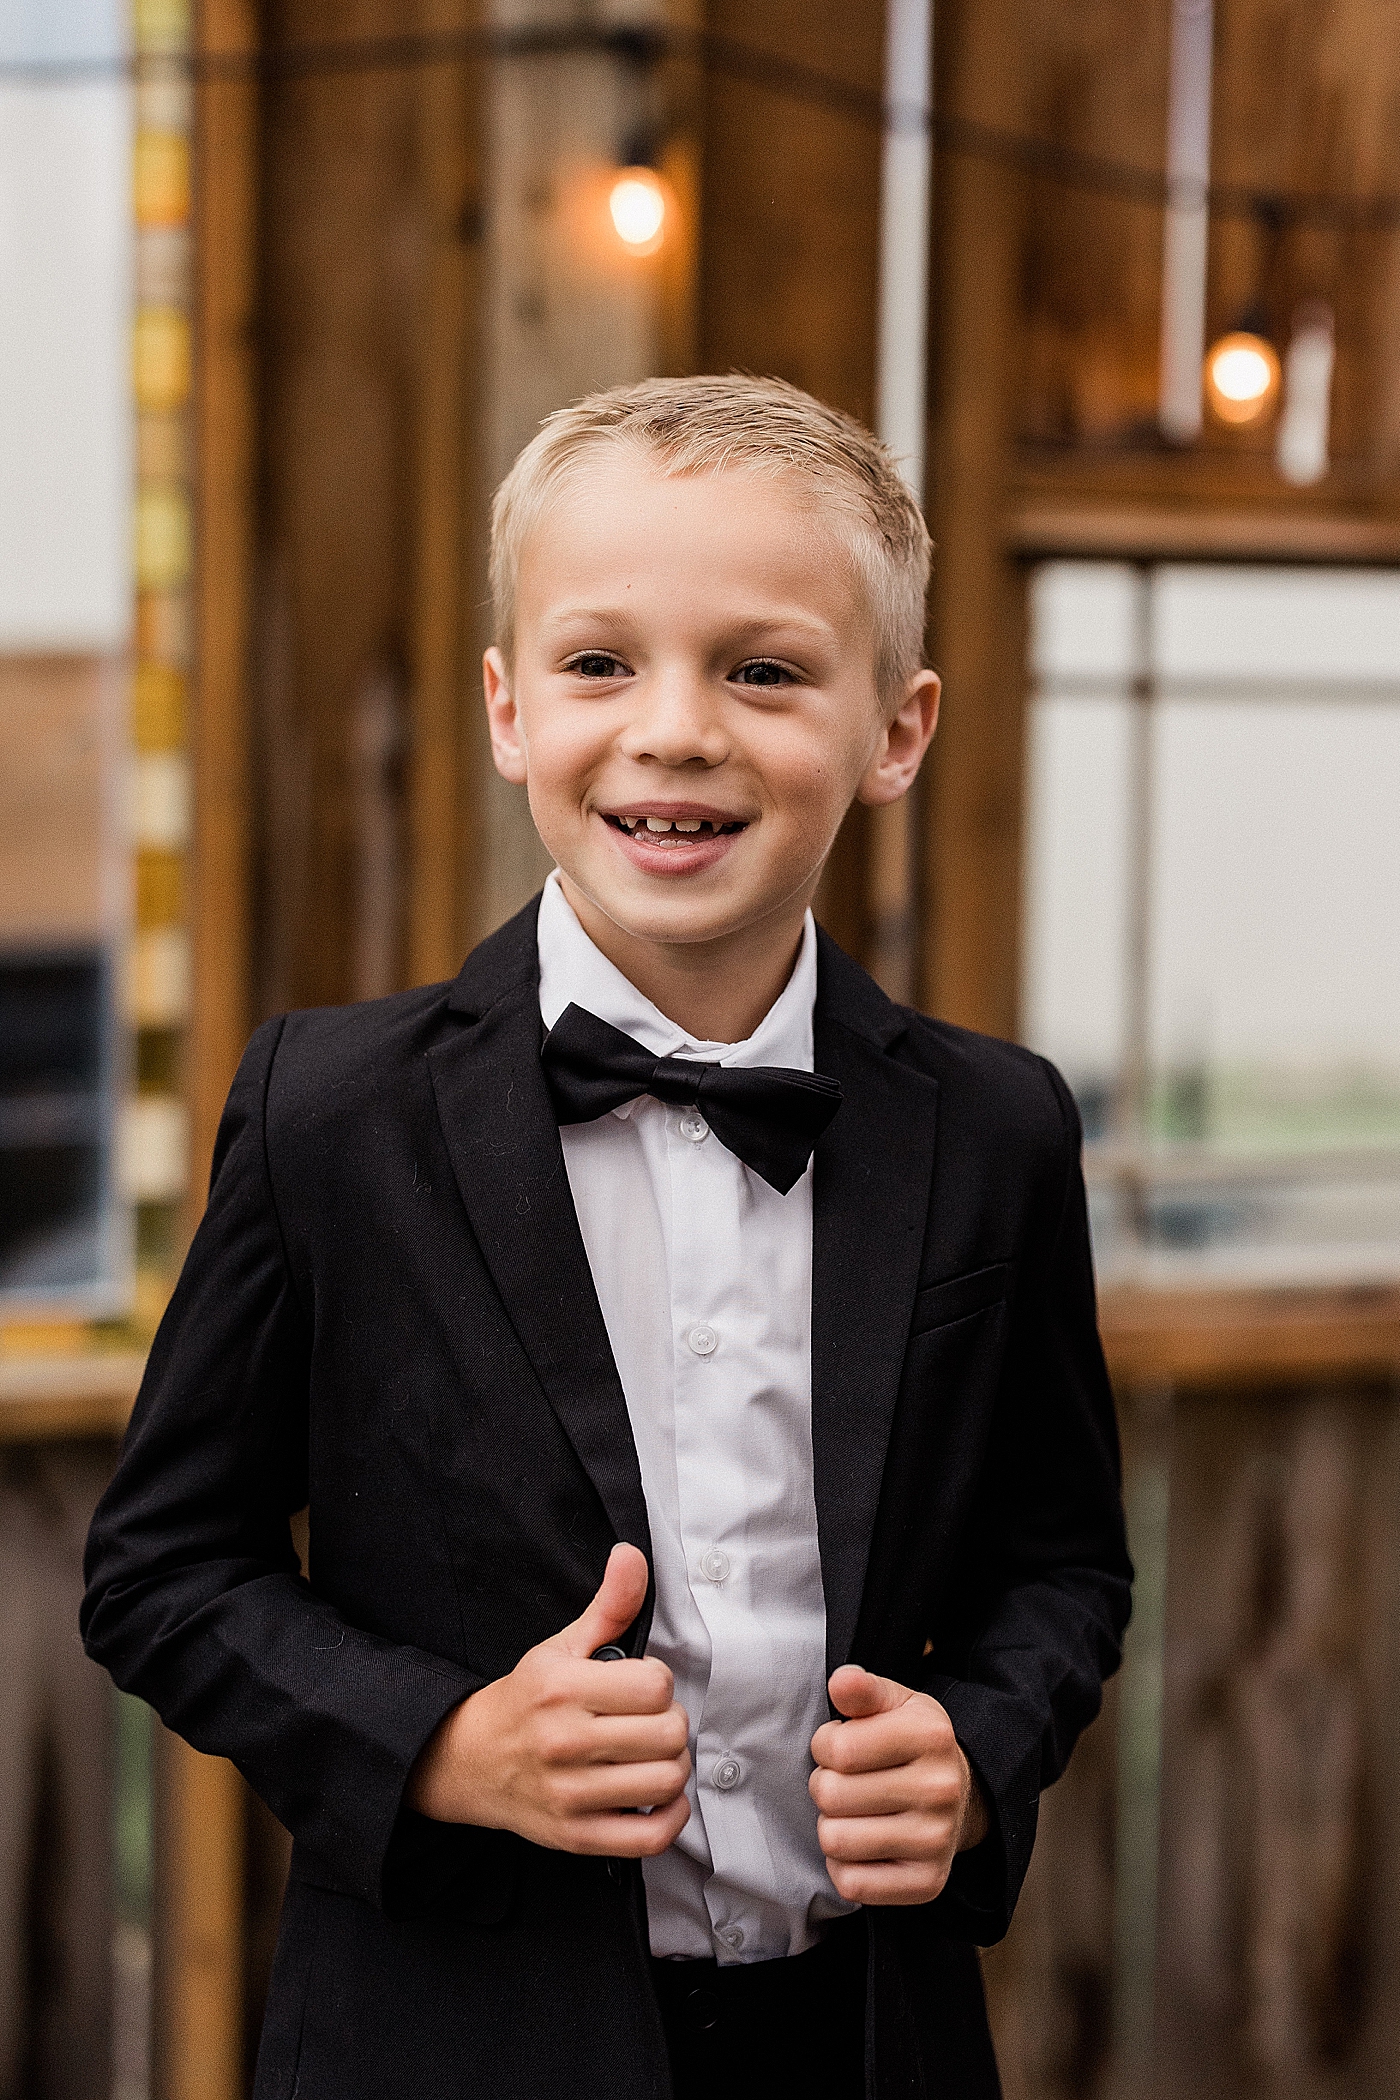 Young boy in suit for wedding. Photo by Megan Montalvo Photography.